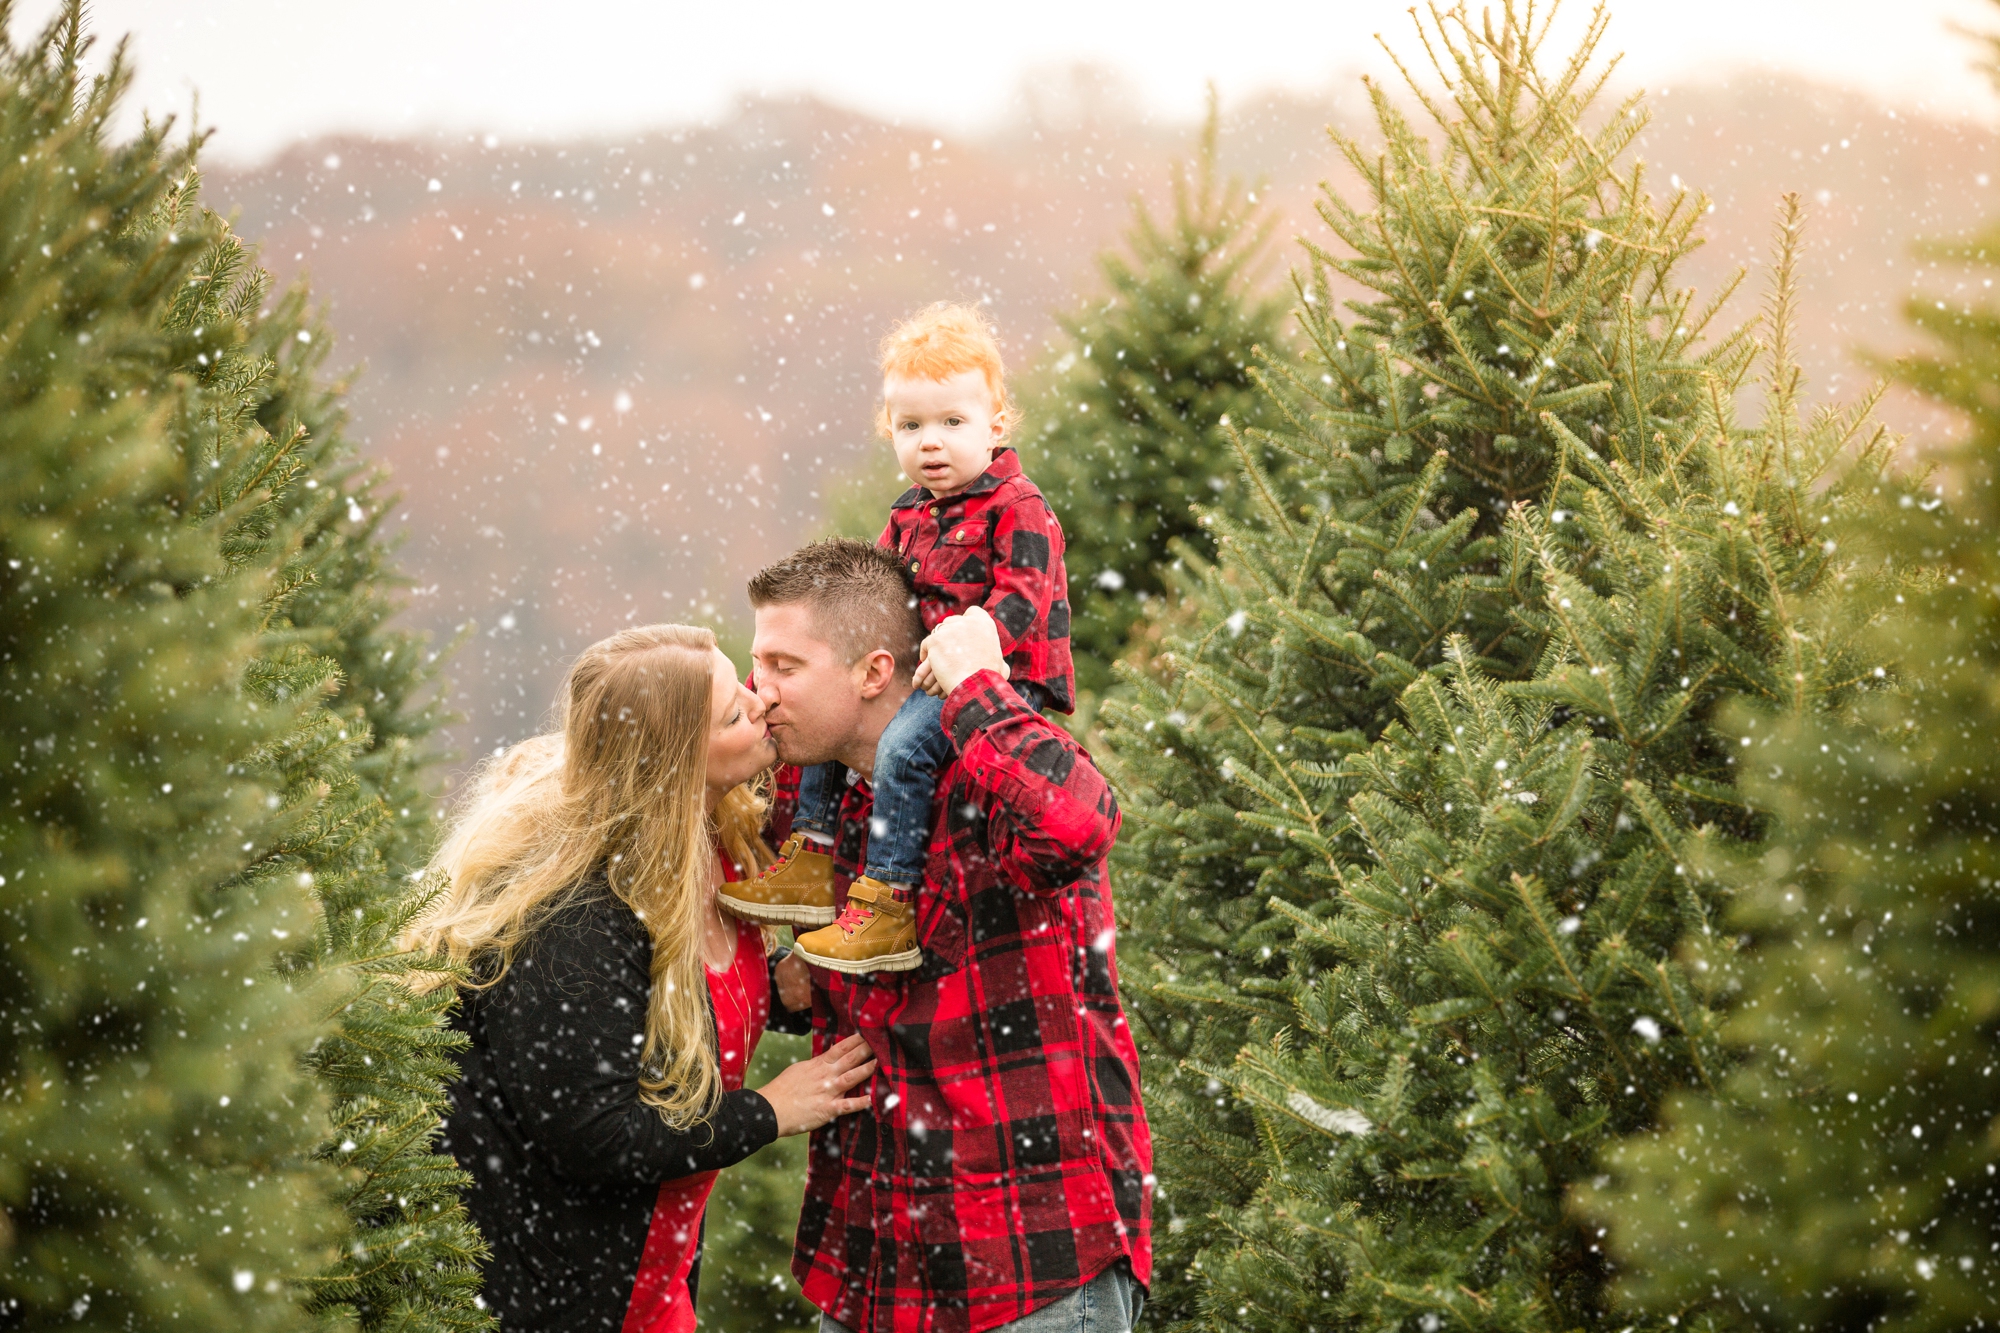 best places to take pictures in pittsburgh, cool places to take pictures in pittsburgh, lake forest gardens, pittsburgh family photographer, christmas tree farm pittsburgh